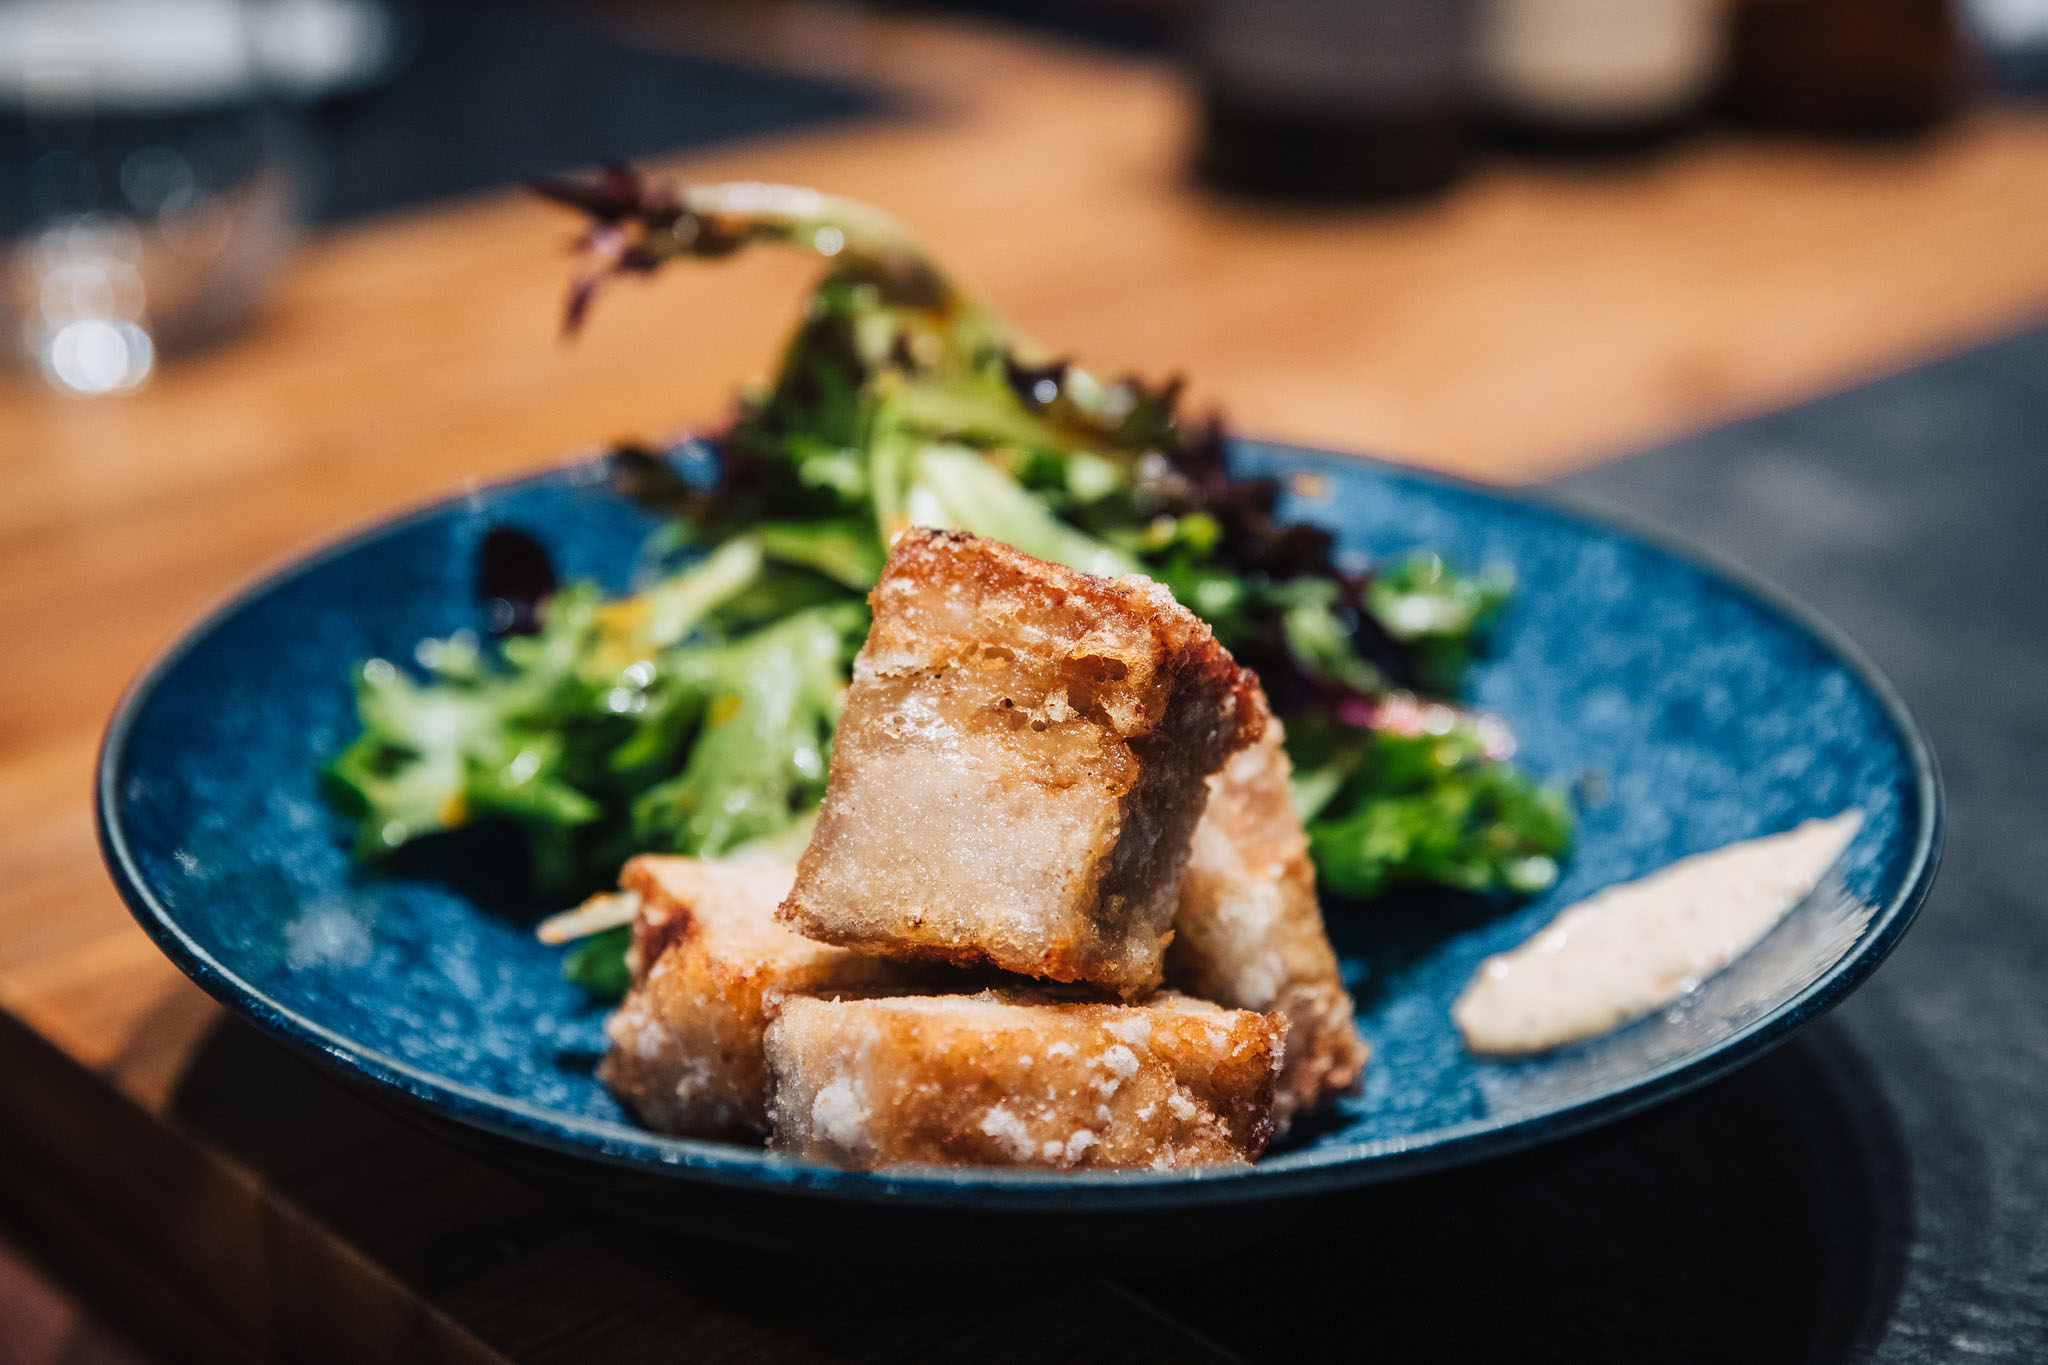 Cubes of deep-fried pork belly and salad greens on a blue plate.